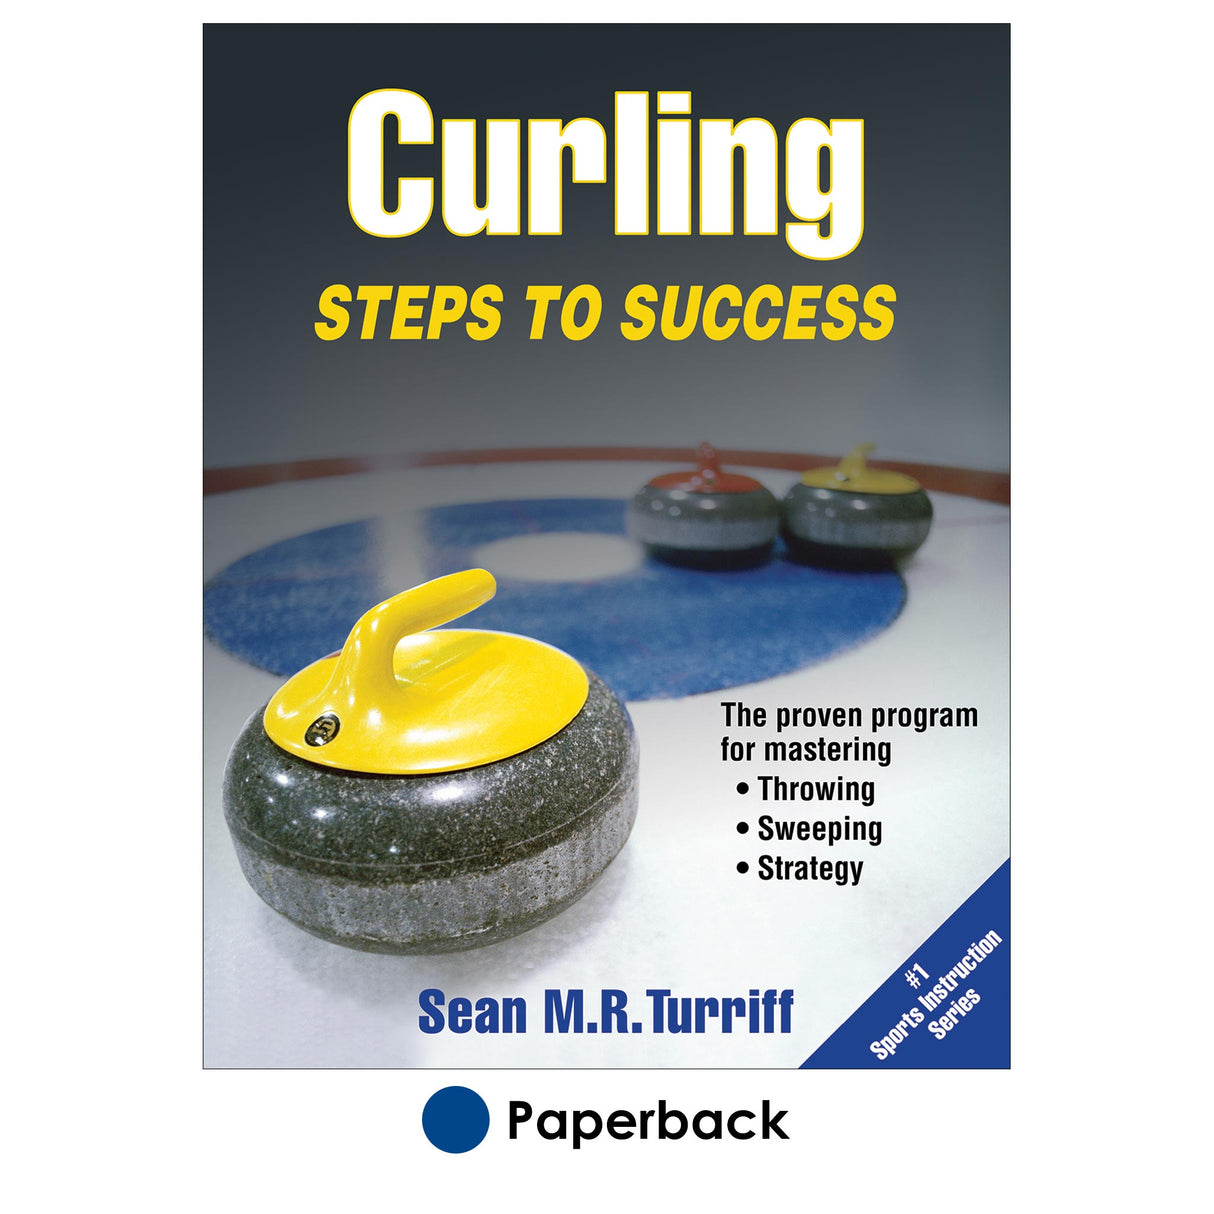 Curling: Steps to Success